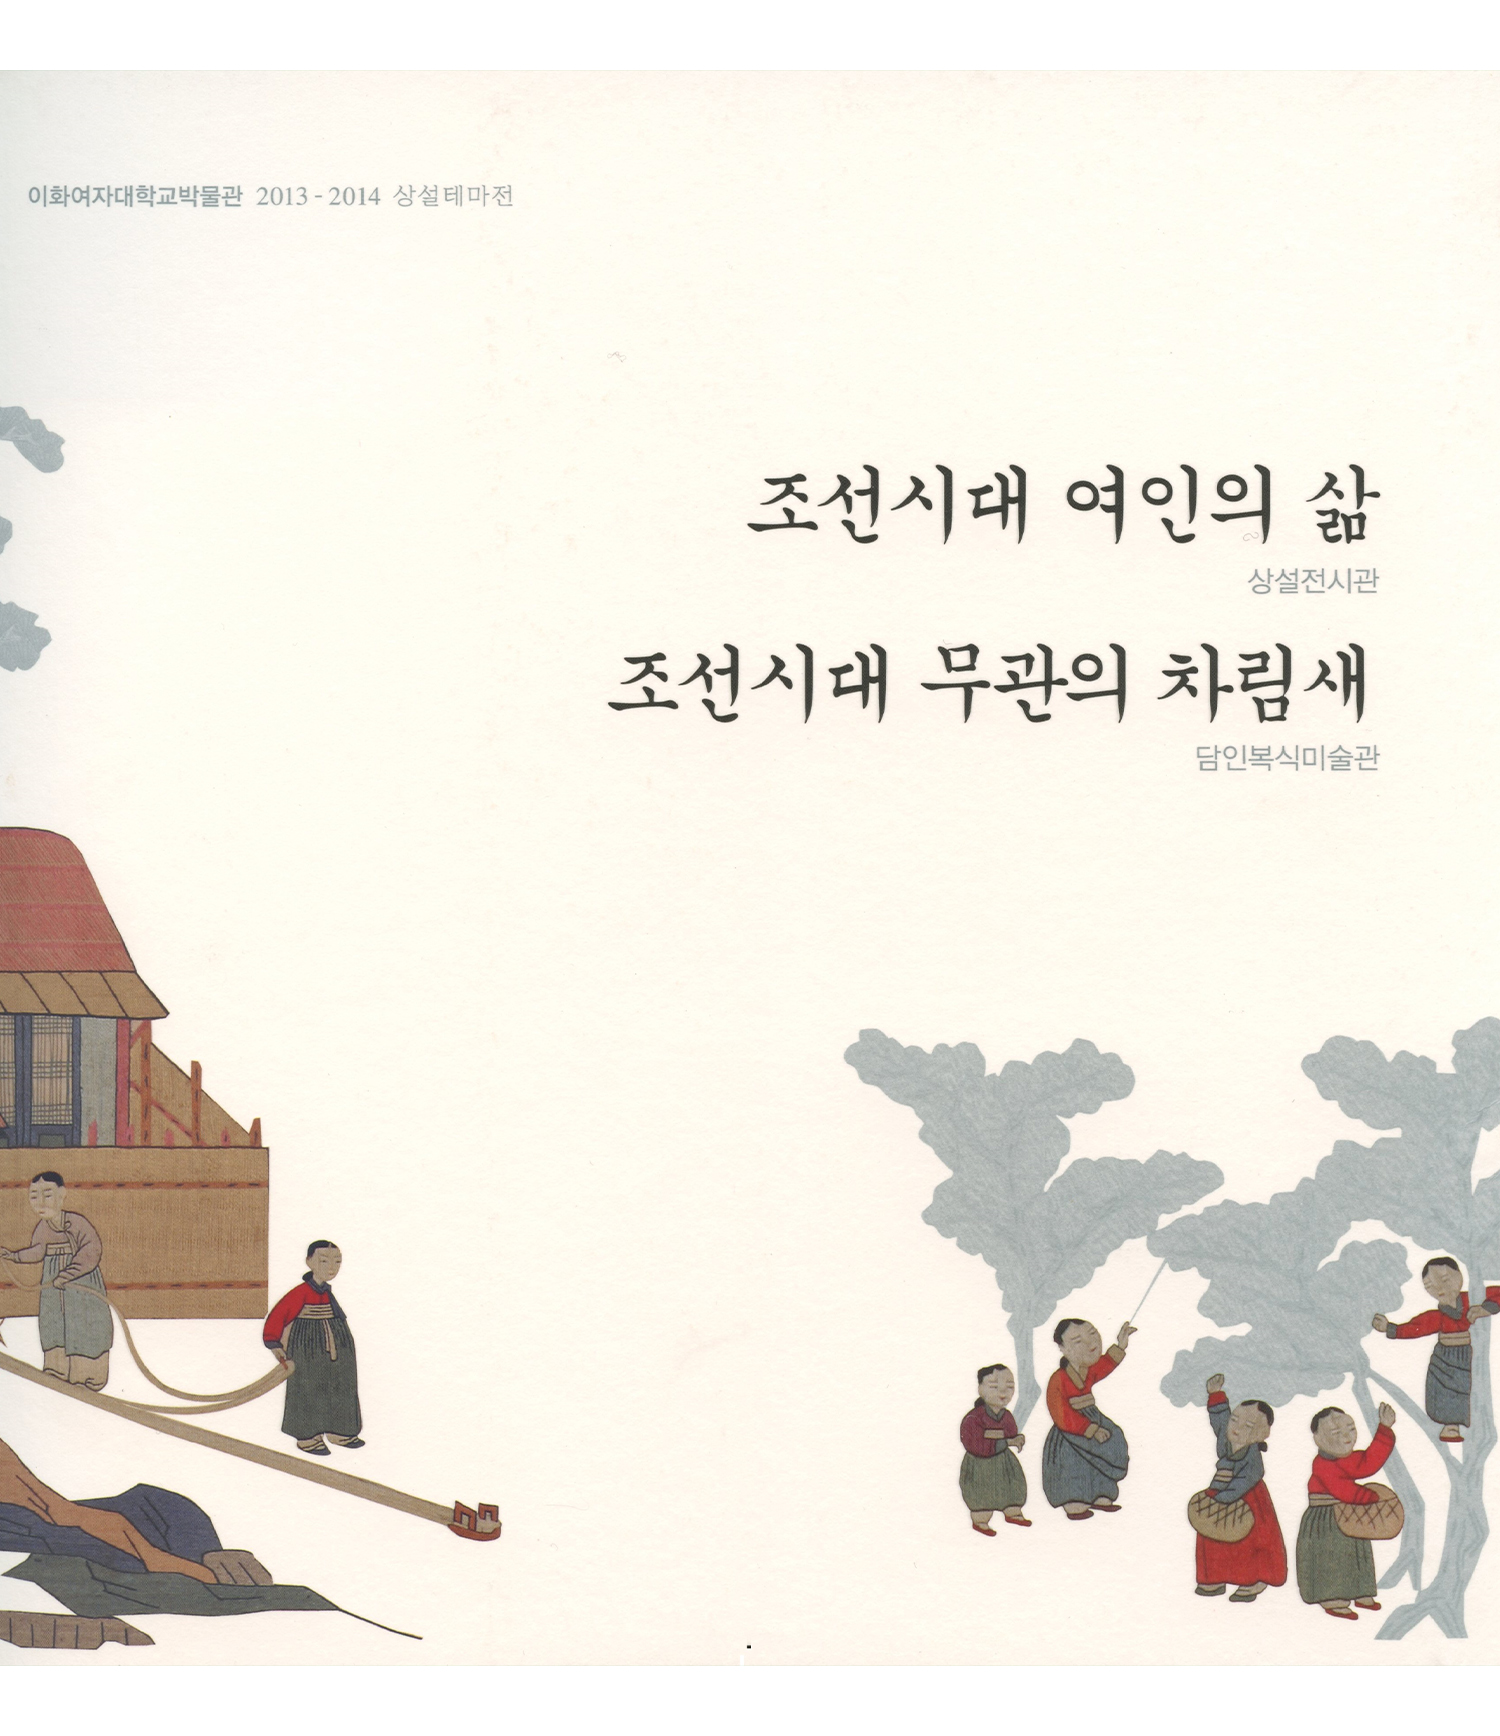 Life of Women in the Joseon Dynasty / Attire of Joseon Military Officers